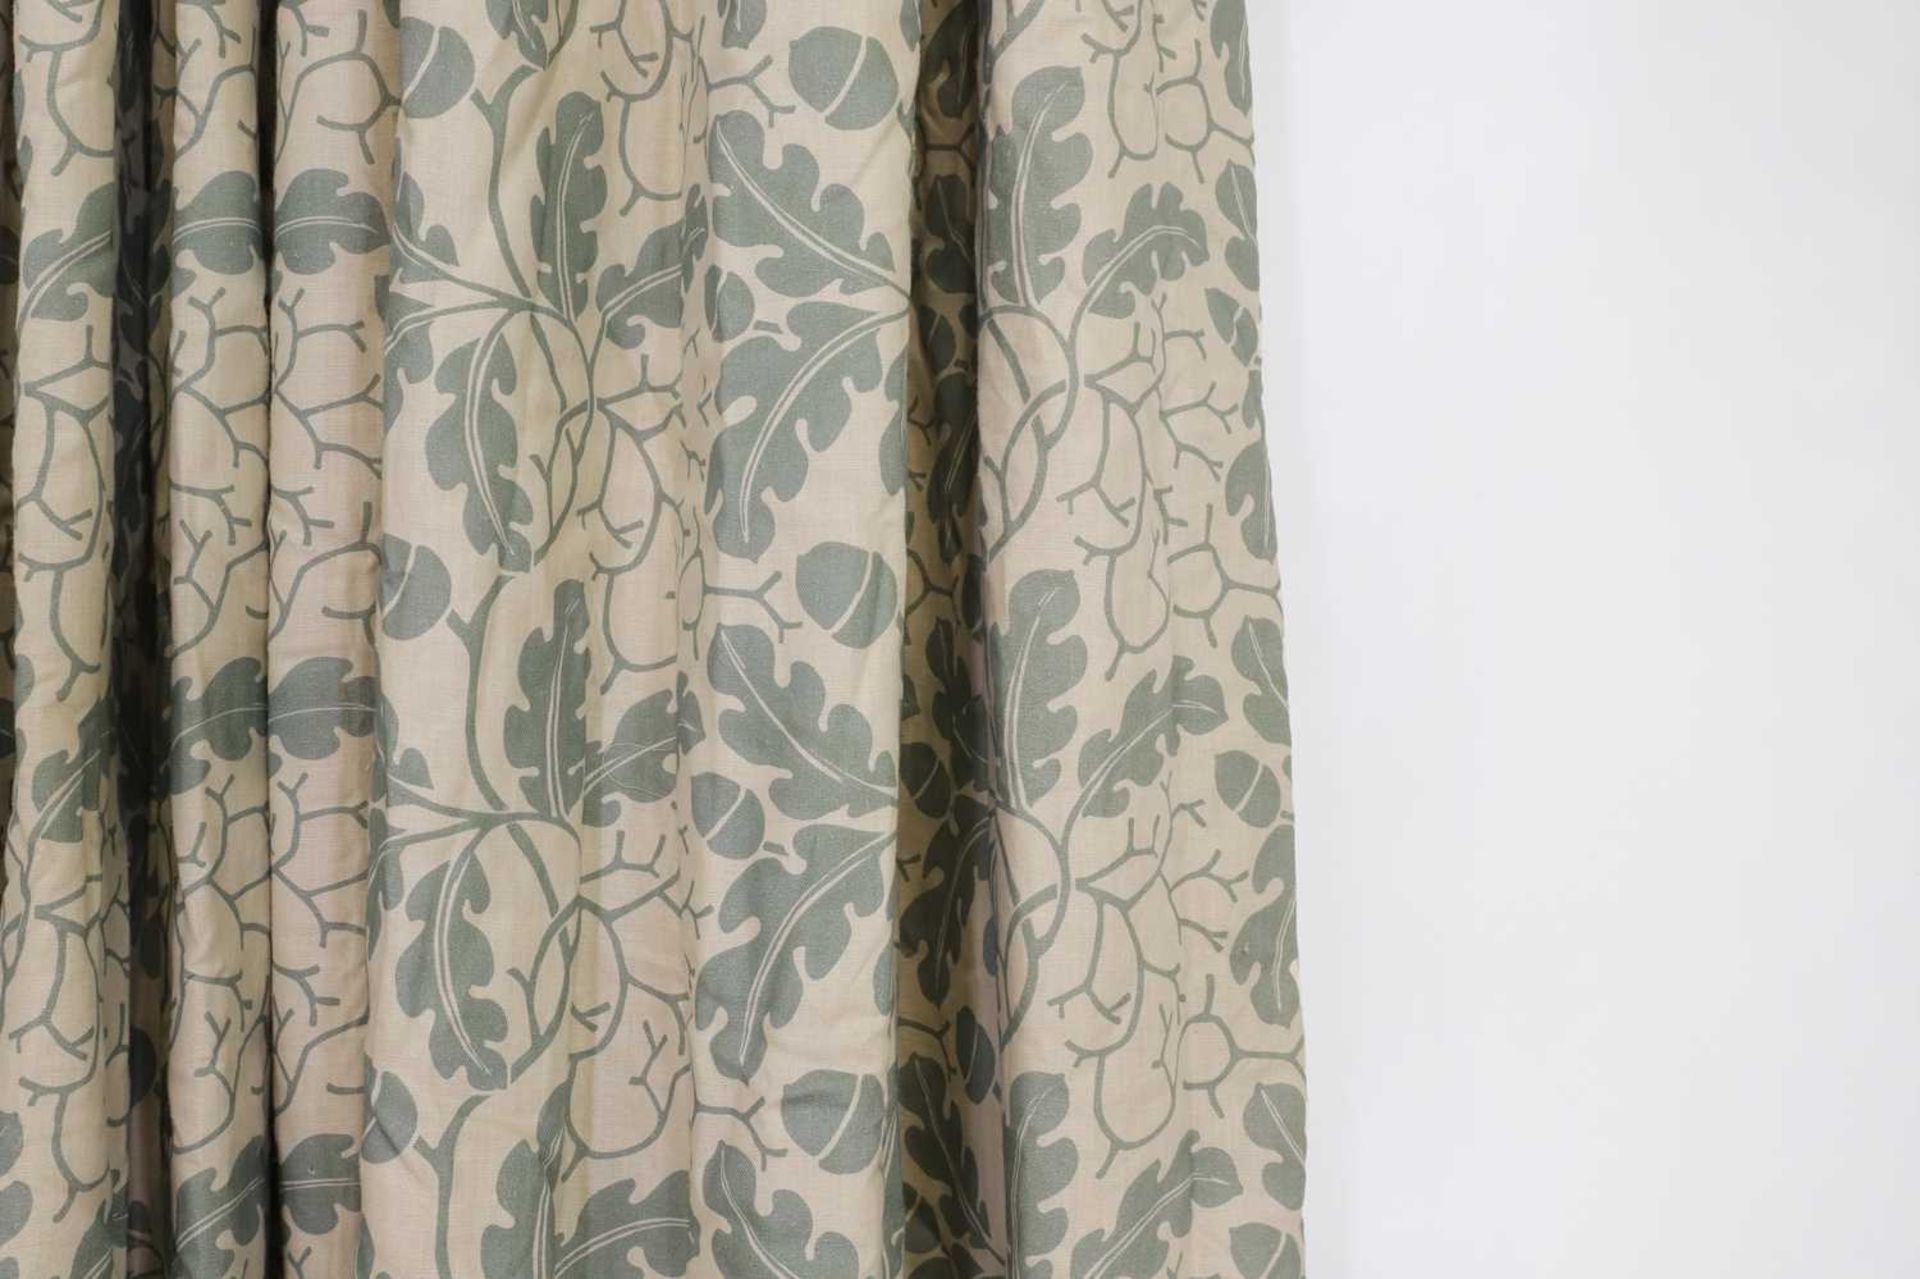 Two pairs of 'Oak Leaves' curtains by Robert Kime, - Image 8 of 14